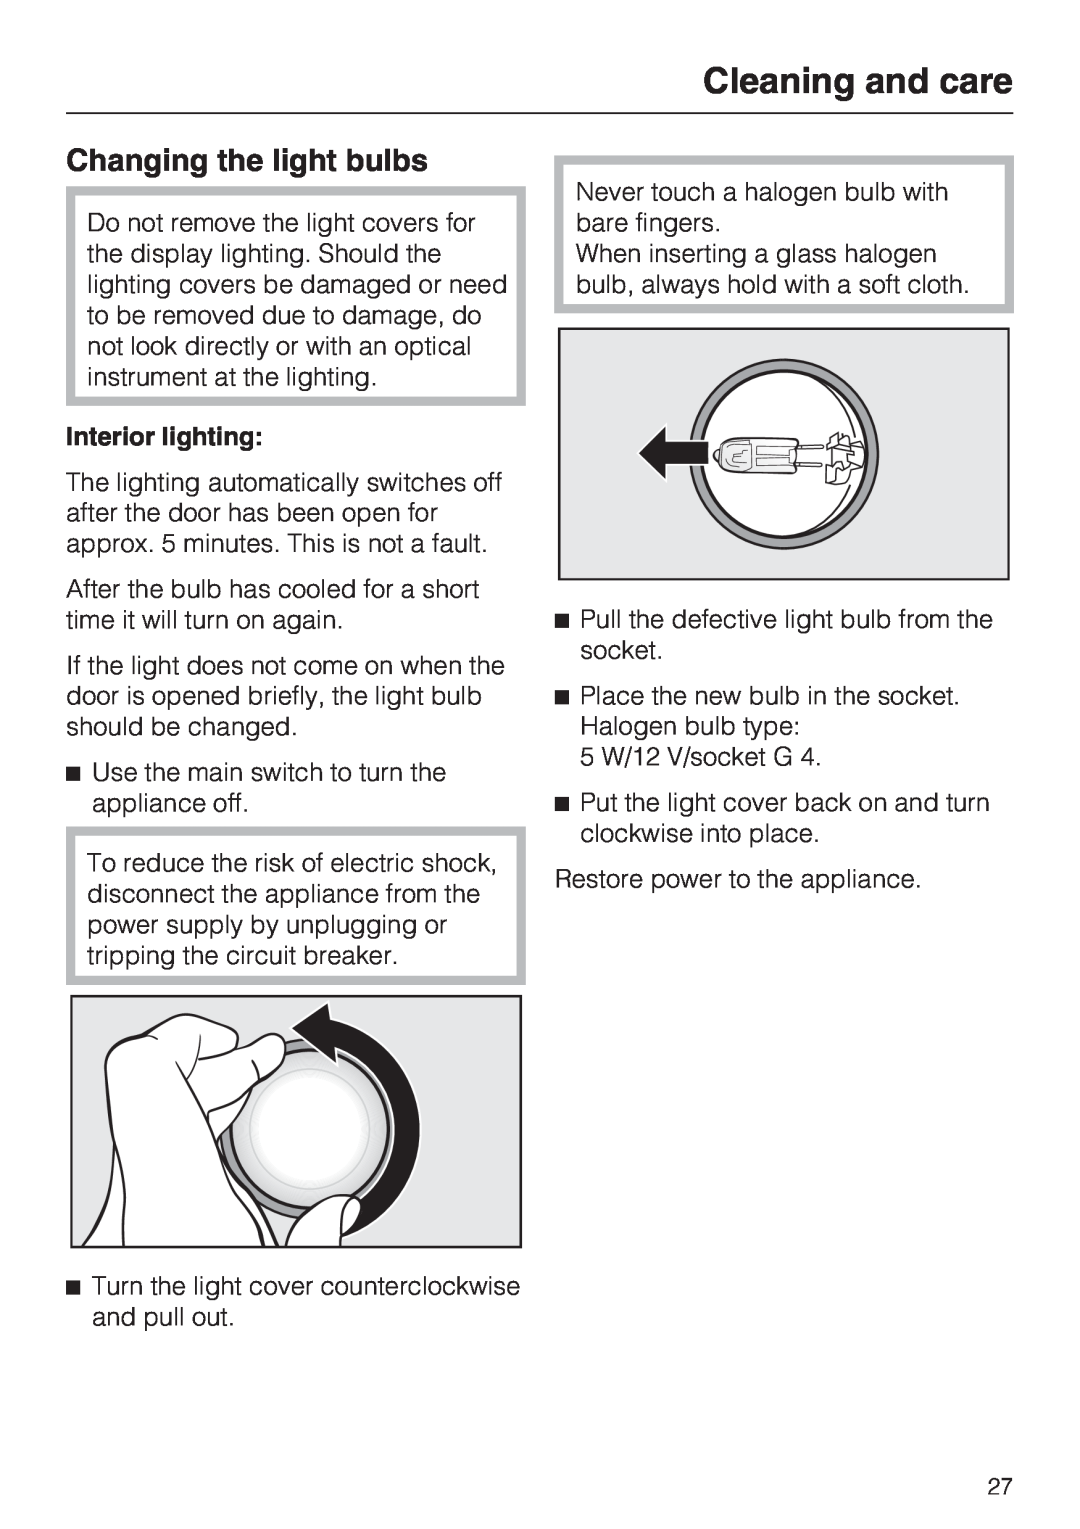 Miele KWT1601VI, KWT1611VI installation instructions Changing the light bulbs, Interior lighting, Cleaning and care 